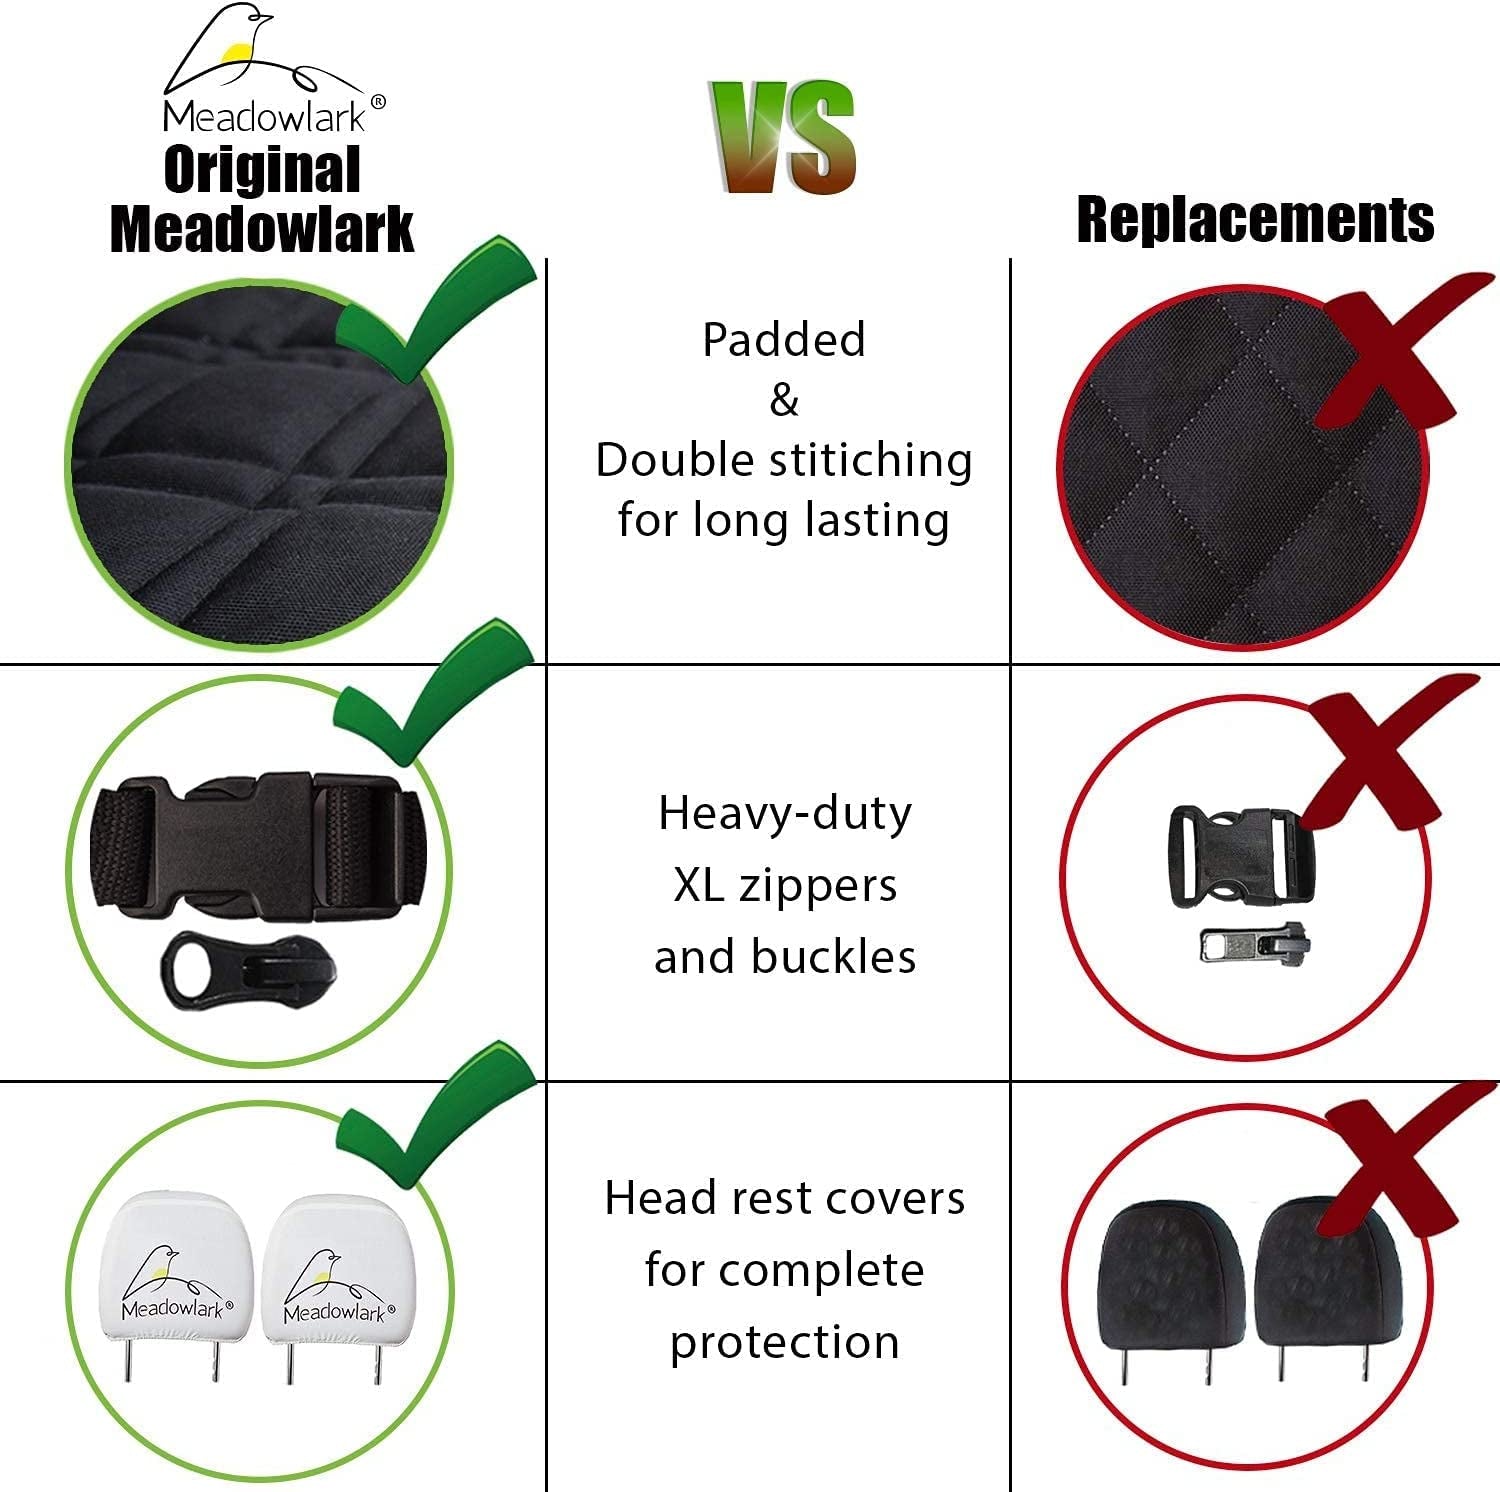 Premium Hammock Dog Car Seat Cover Back Seat, Dog Cover Car Seat Protector, Non-Slip, Dog Stuff, anti Shock, Water Repellant, Pet Car Seat Cover for Dogs W/Seat Belt & 2 Headrest Covers - PETGS